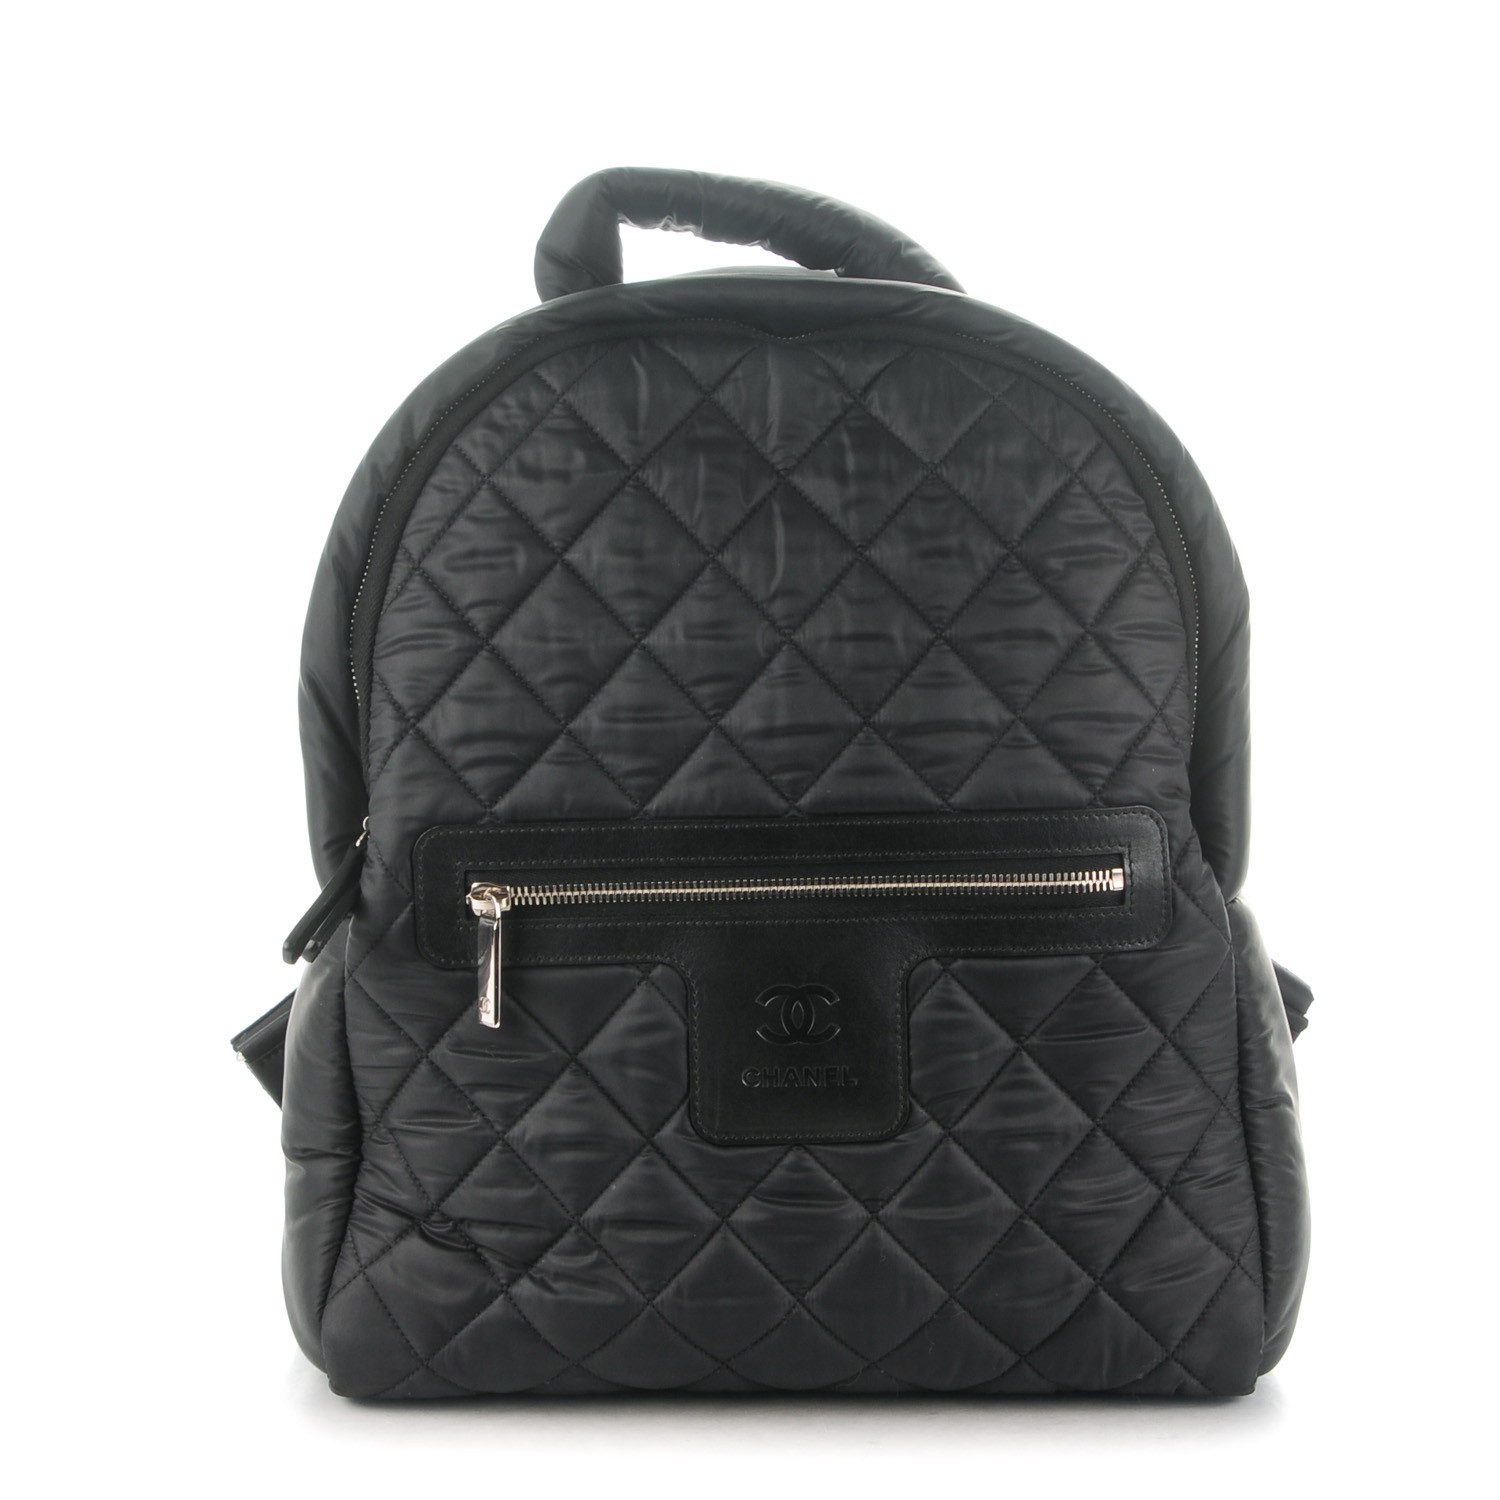 CHANEL Nylon Quilted Coco Cocoon Backpack Black 165024